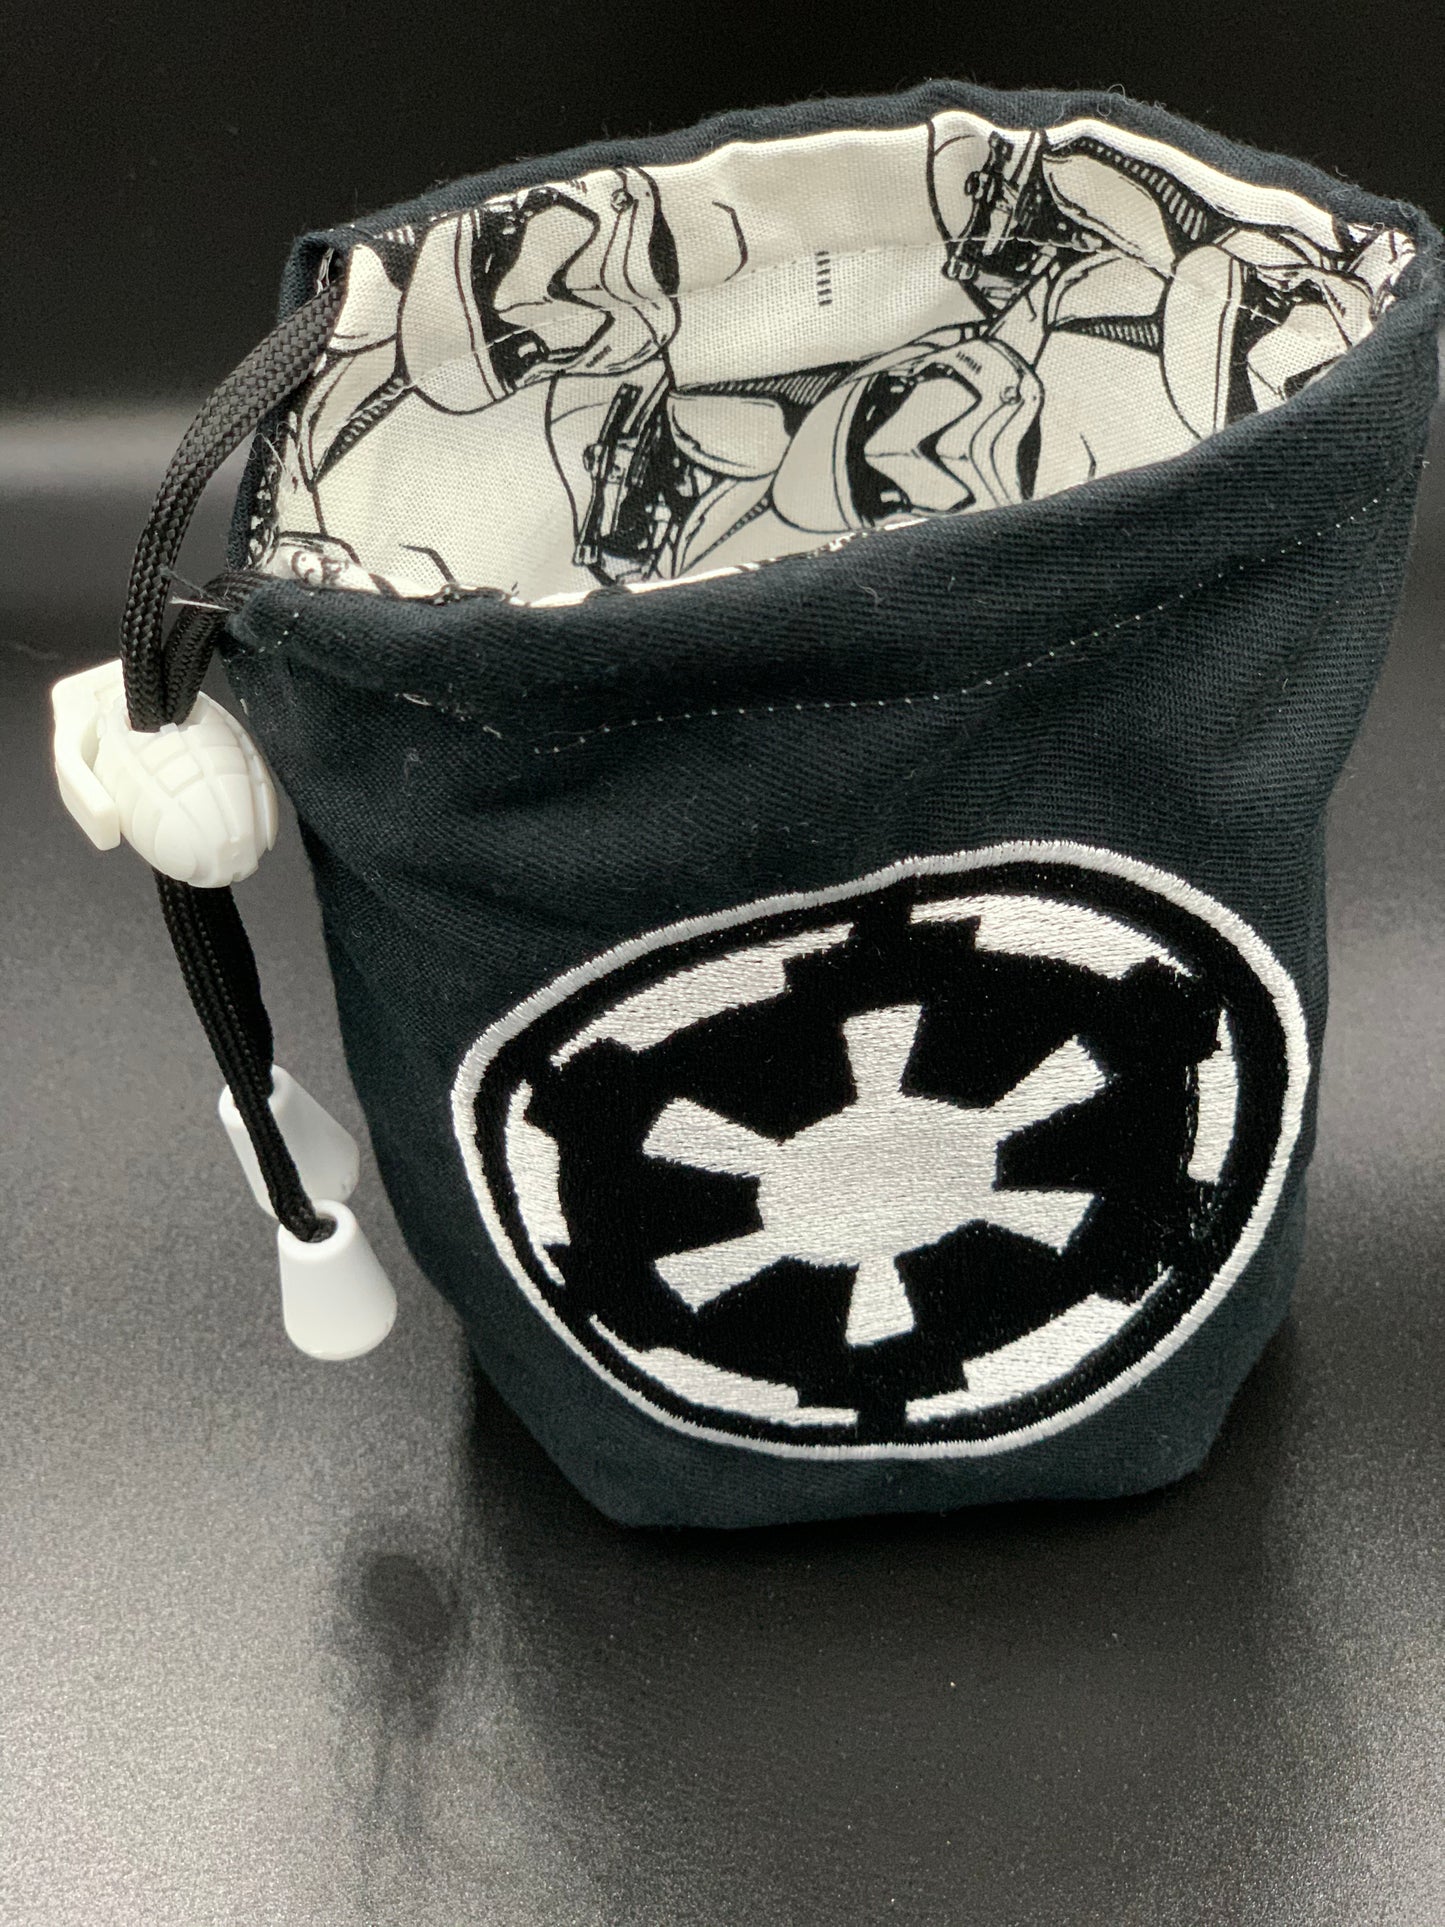 Star Wars Empire Emblem Embroidered Bag - Small